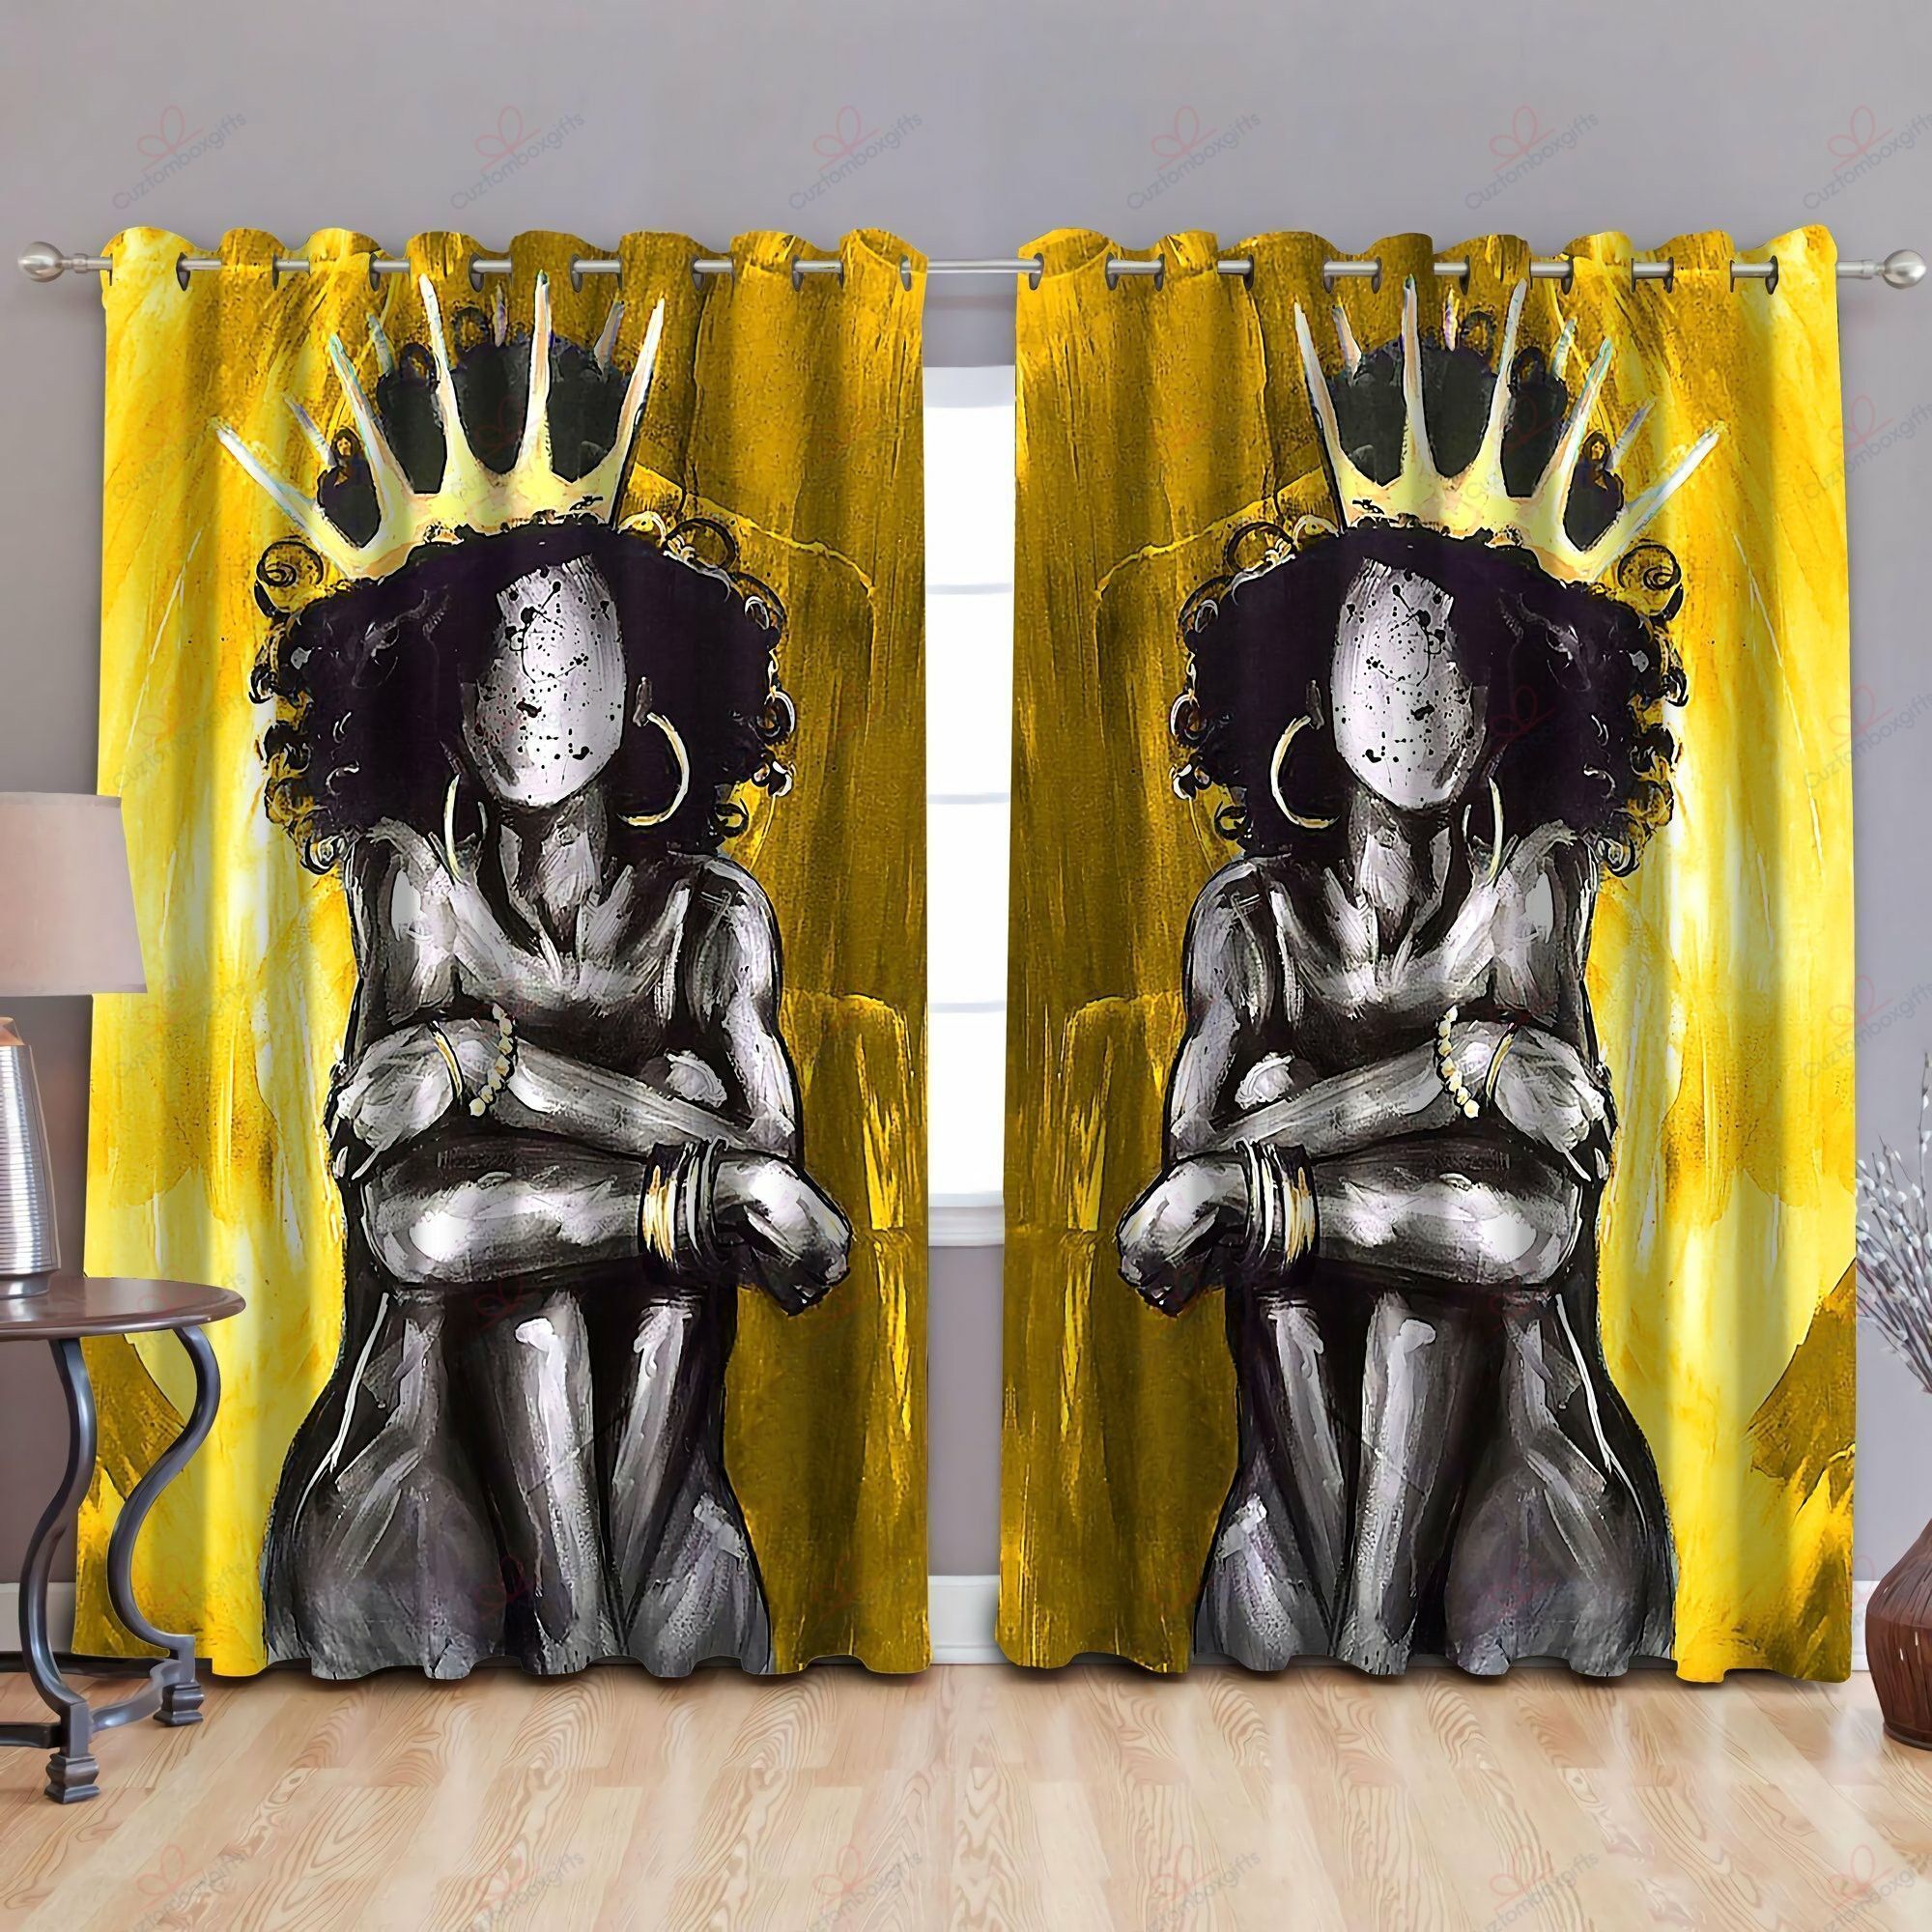 Black Queen And Yellow Background Printed Window Curtain Home Decor